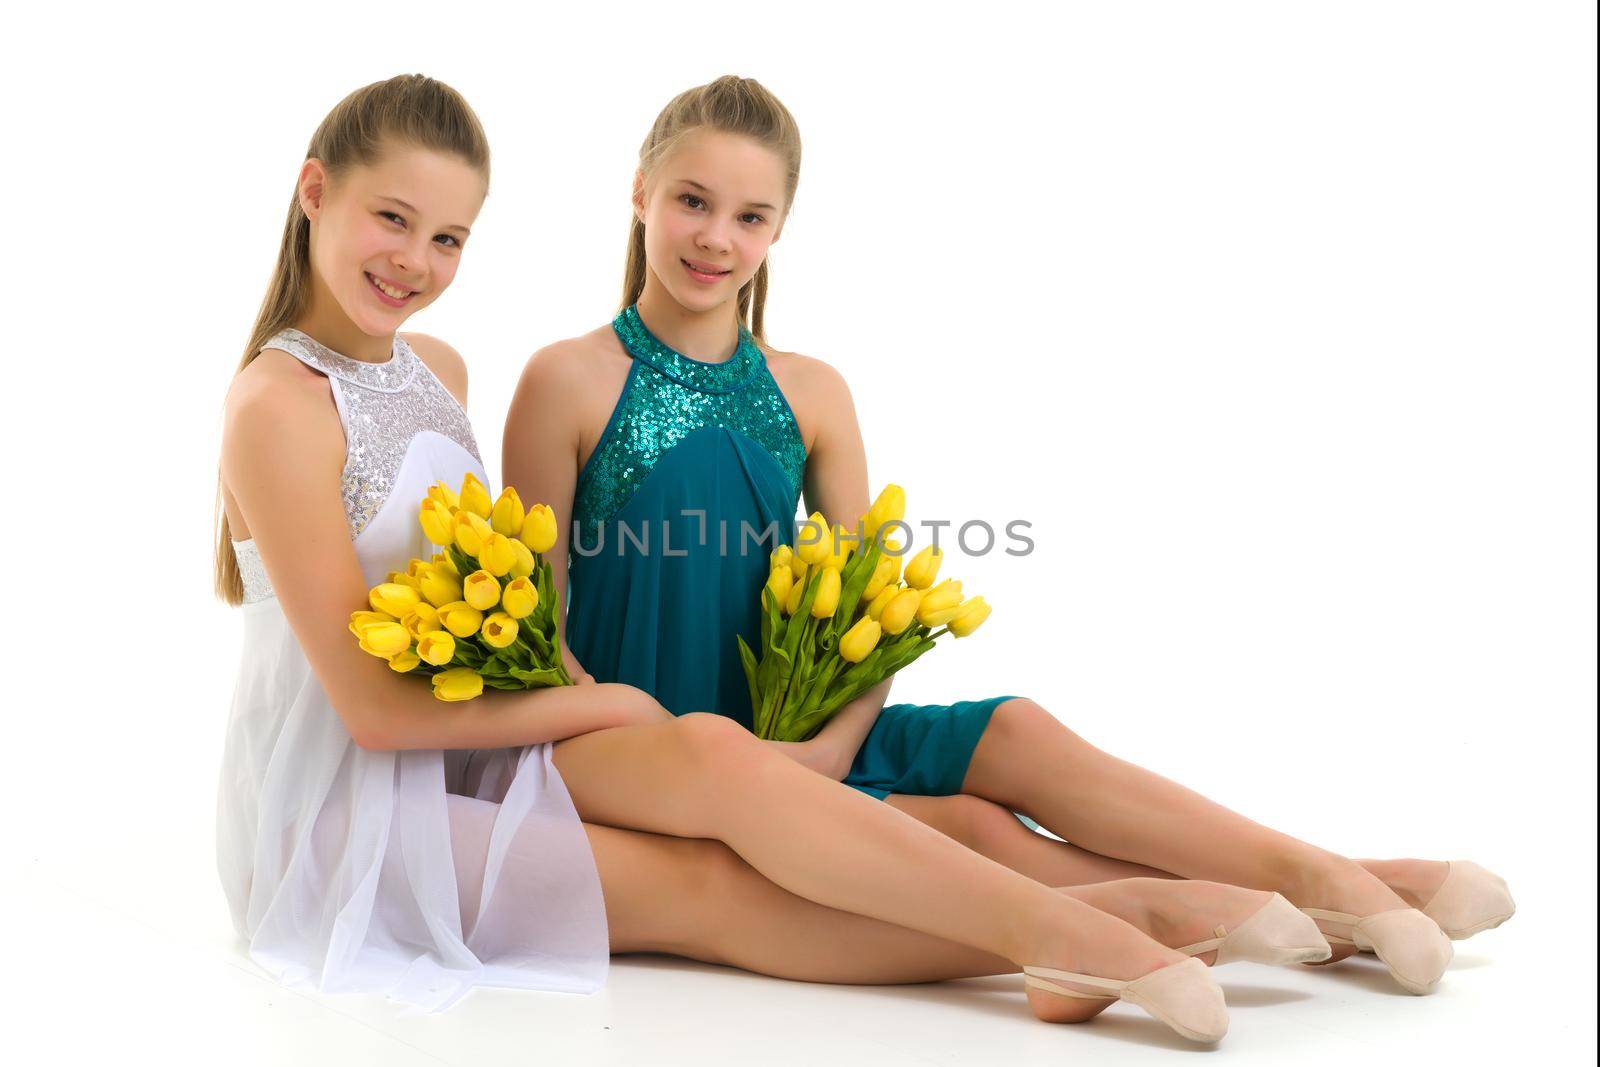 Beautiful girls sitting on the floor with a bouquet of yellow tulips, smiling sisters in summer dresses, portrait of pretty teenage girls on a white background